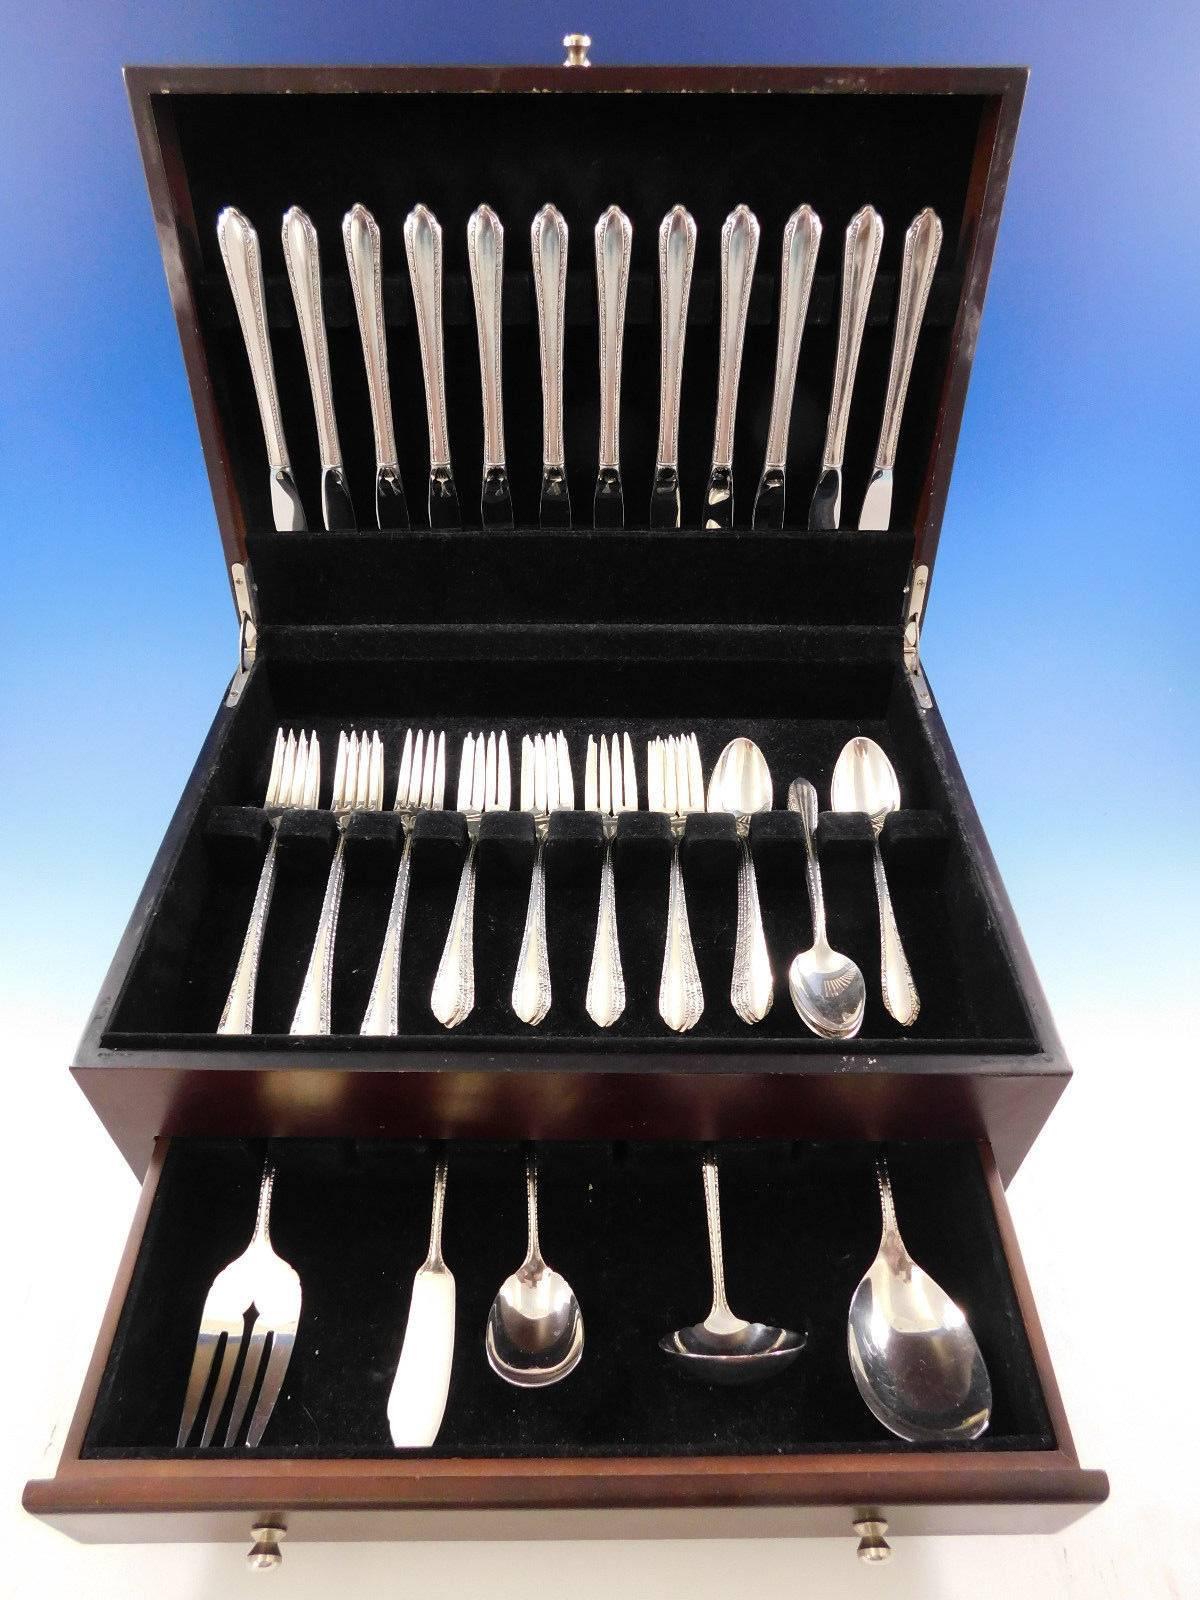 Grille size Wildflower by Royal Crest sterling silver flatware set, 53 pieces. This set includes: 

12 grille size knives, 8 3/8